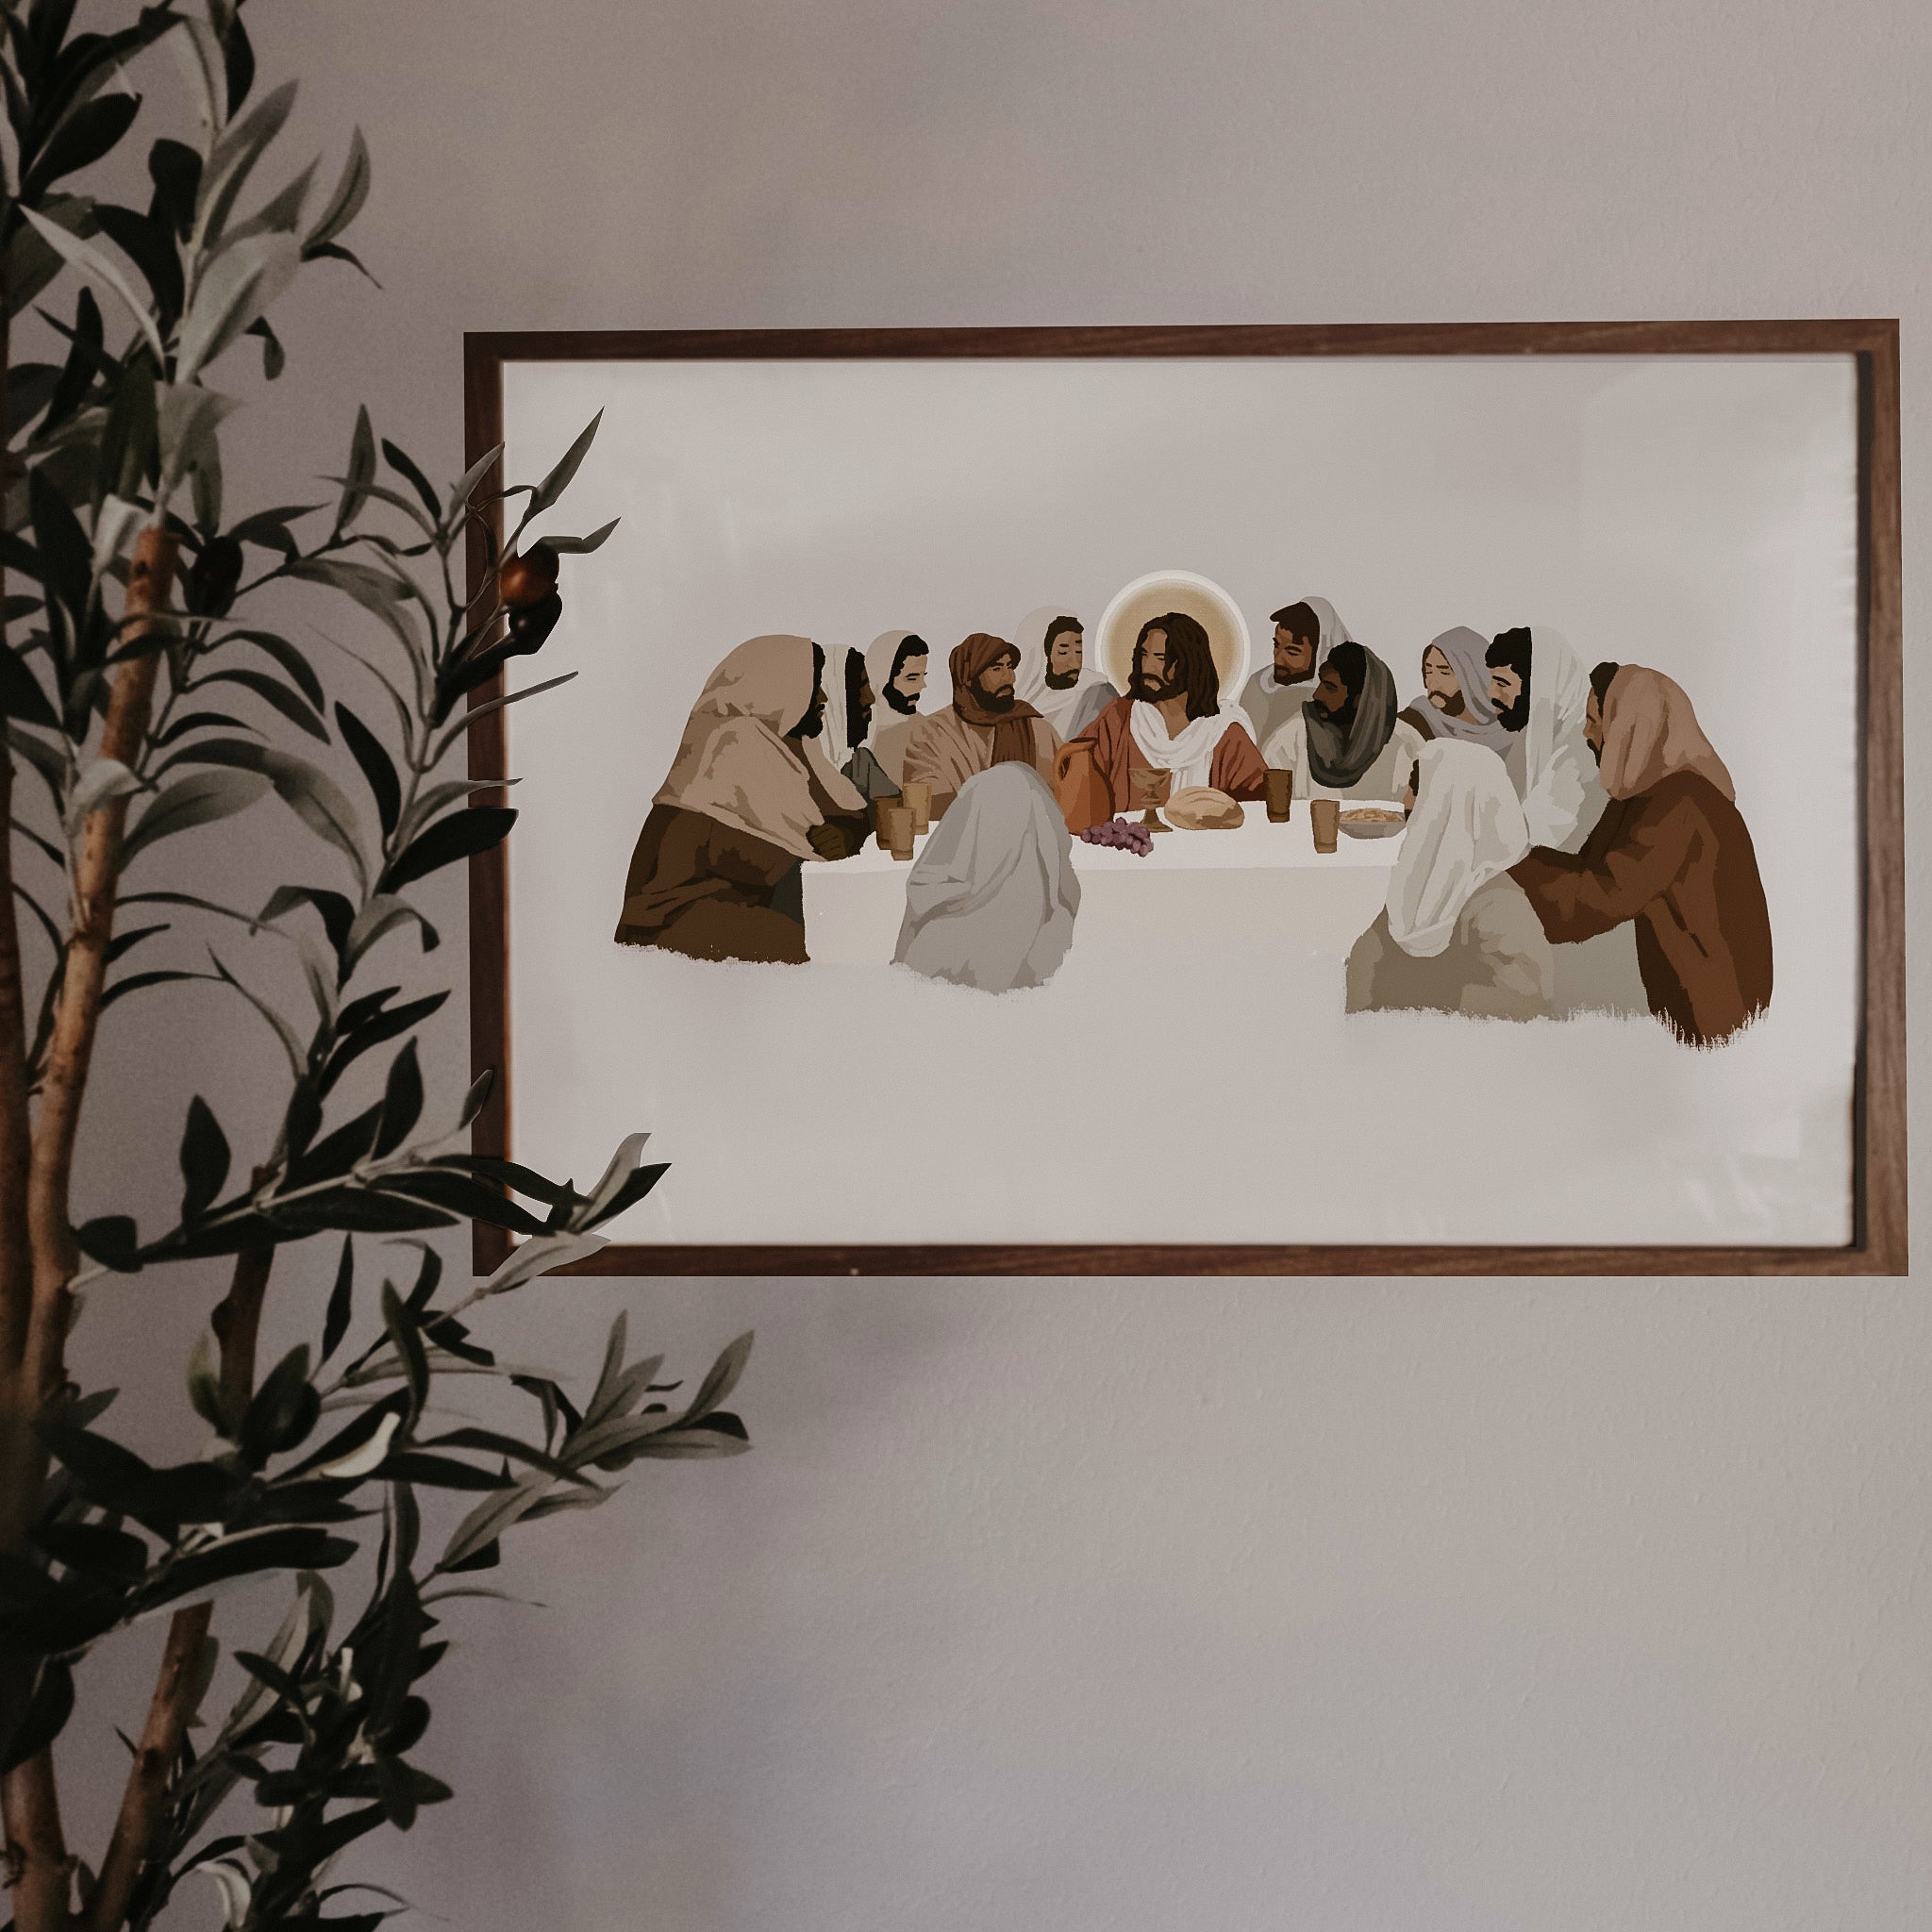 The Last Supper Print